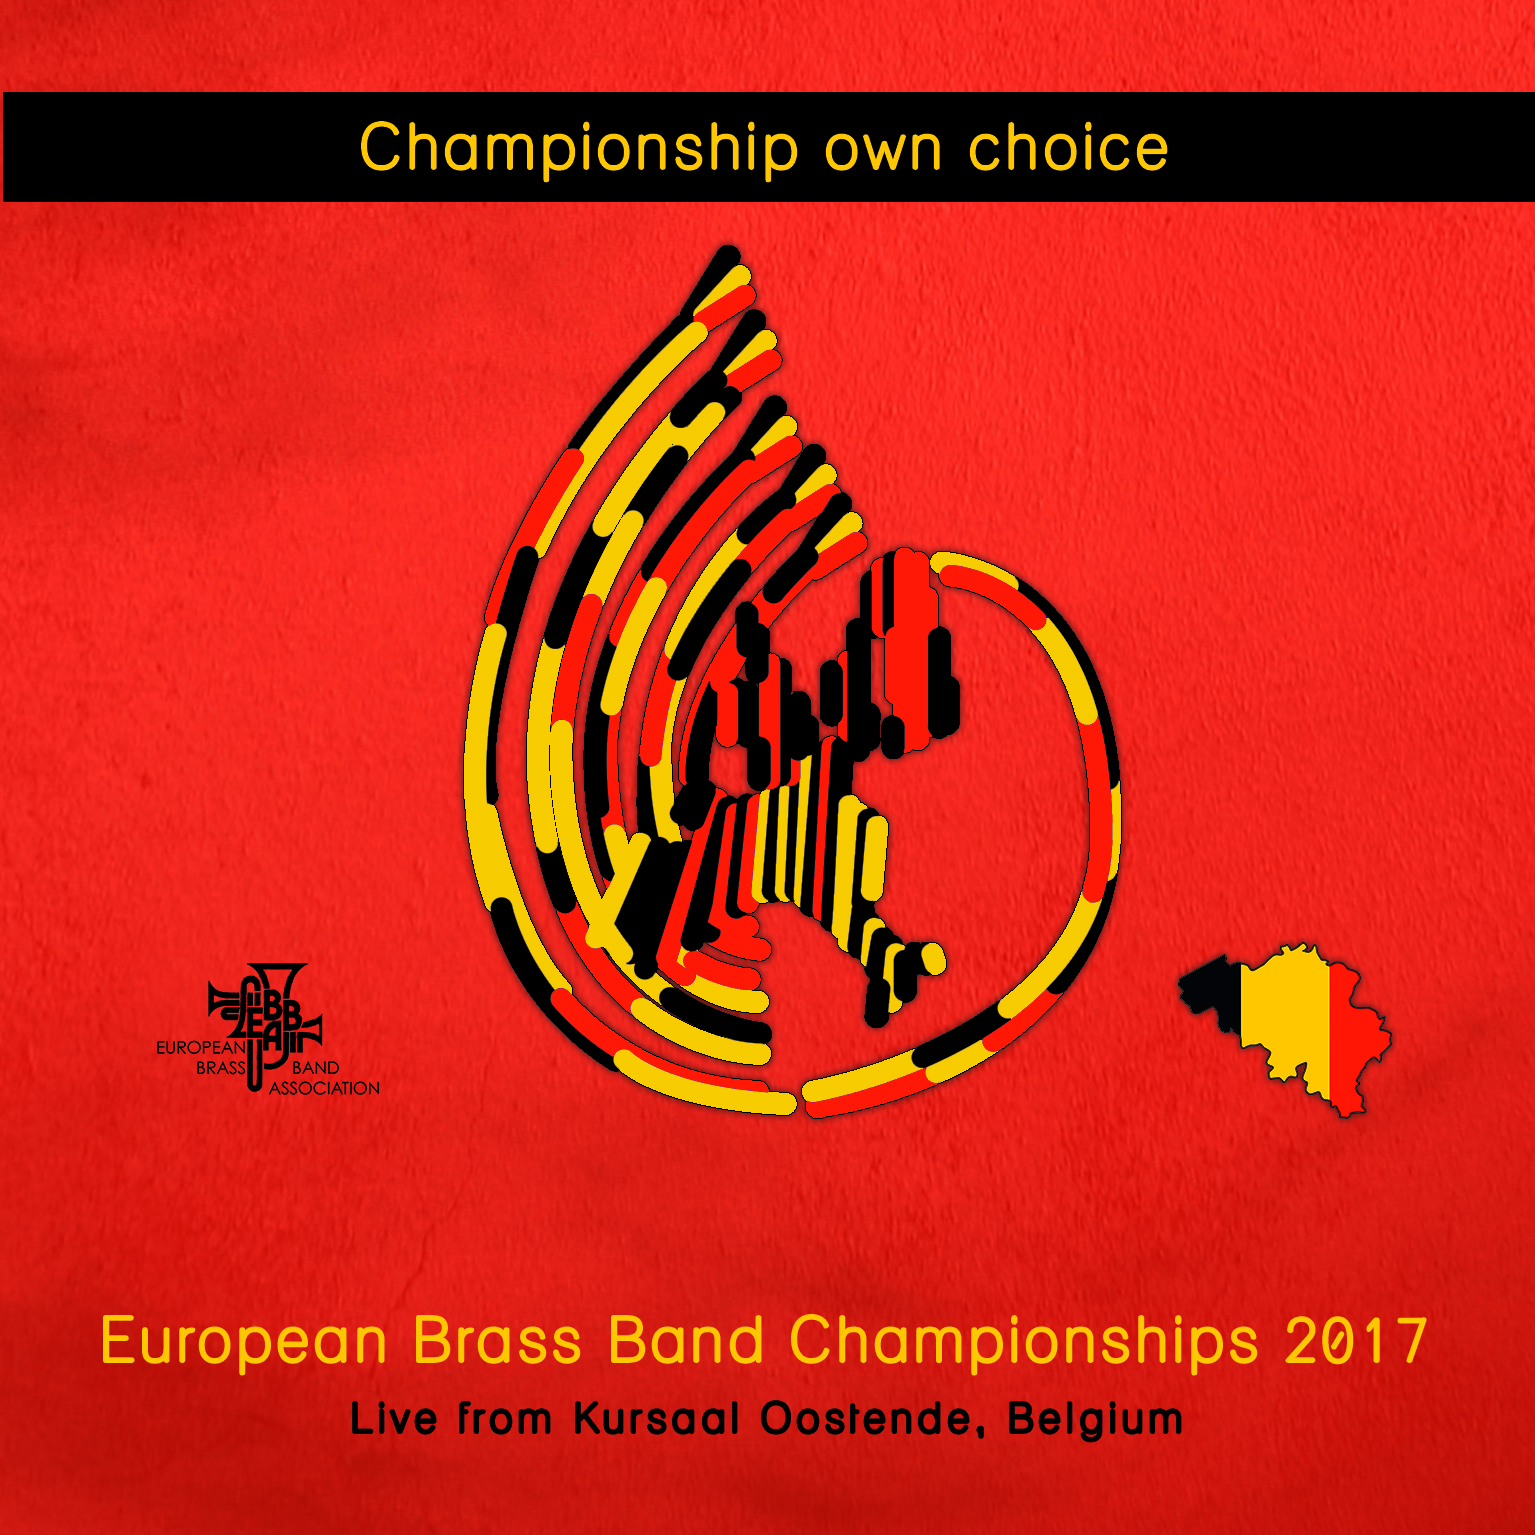 European Brass Band Championships 2017 - Championship Section Own Choice - Download